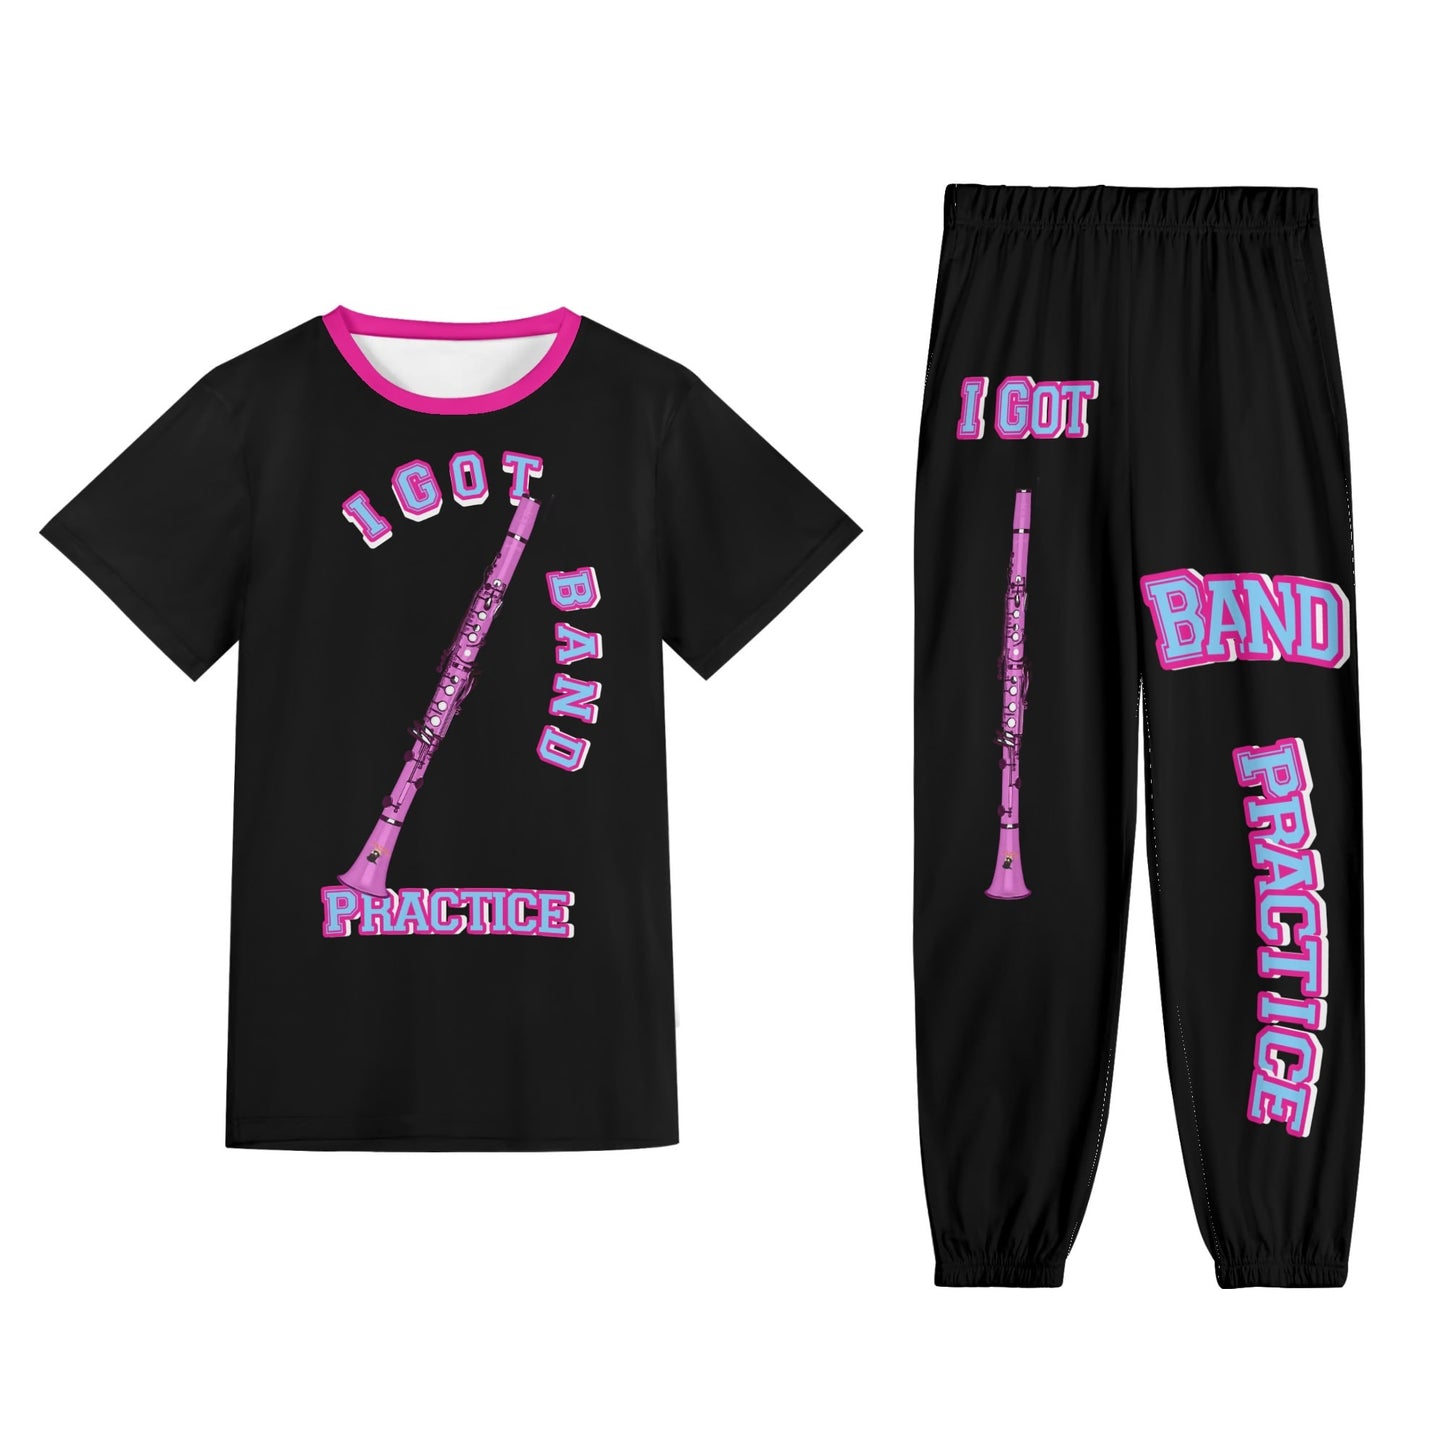 Dnt Juge My Different Unisex All-Over Print Adult Short Sleeve-Blouse Sports Set